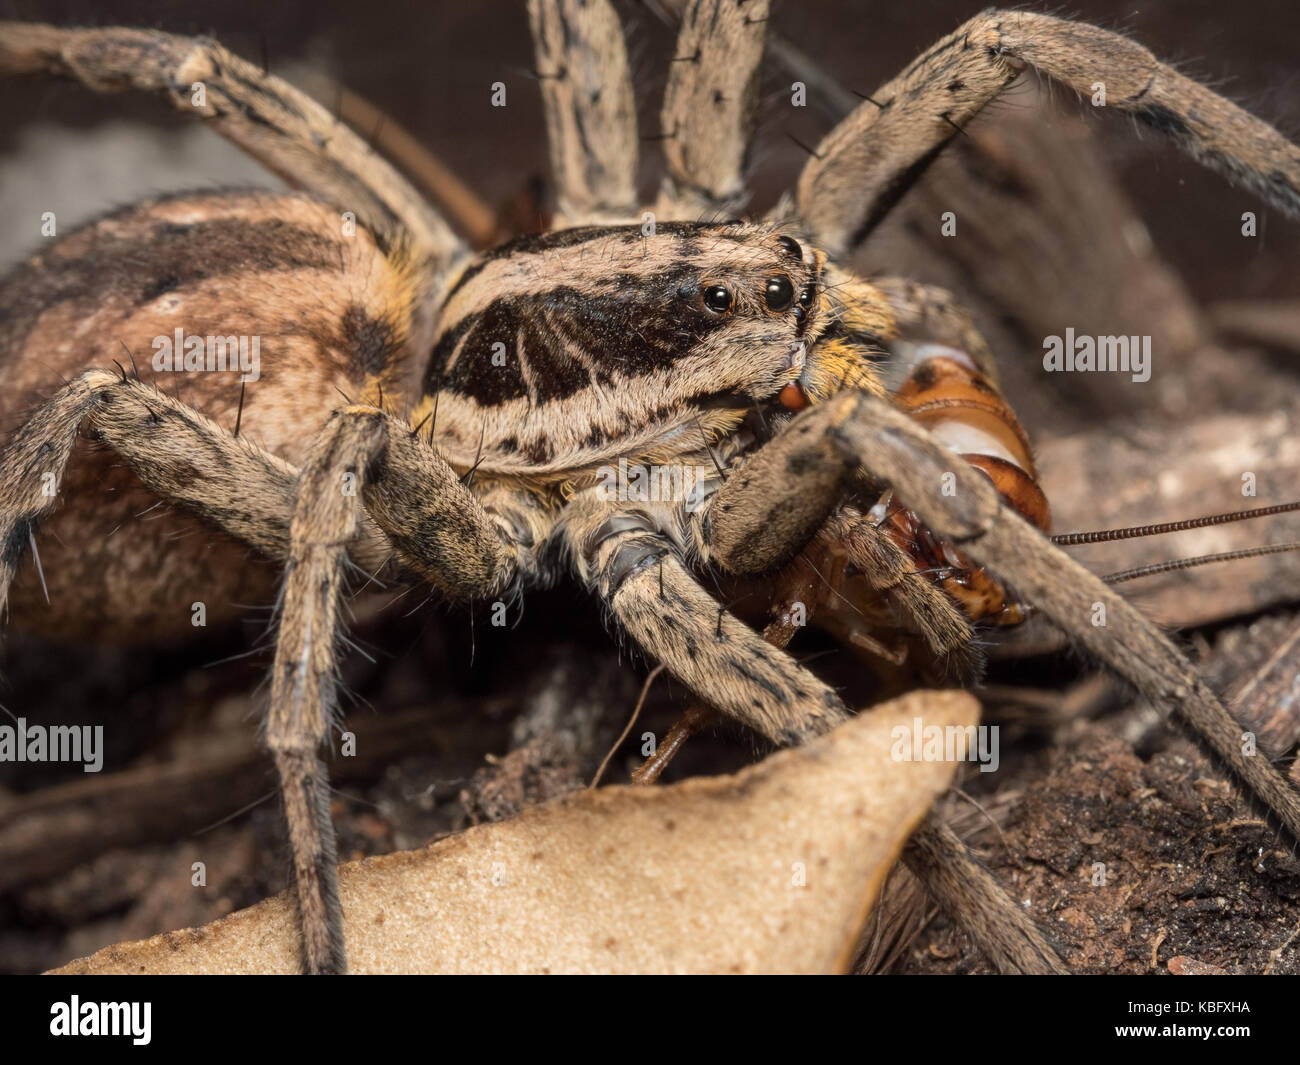 Spider fedding on a house cricket Stock Photo